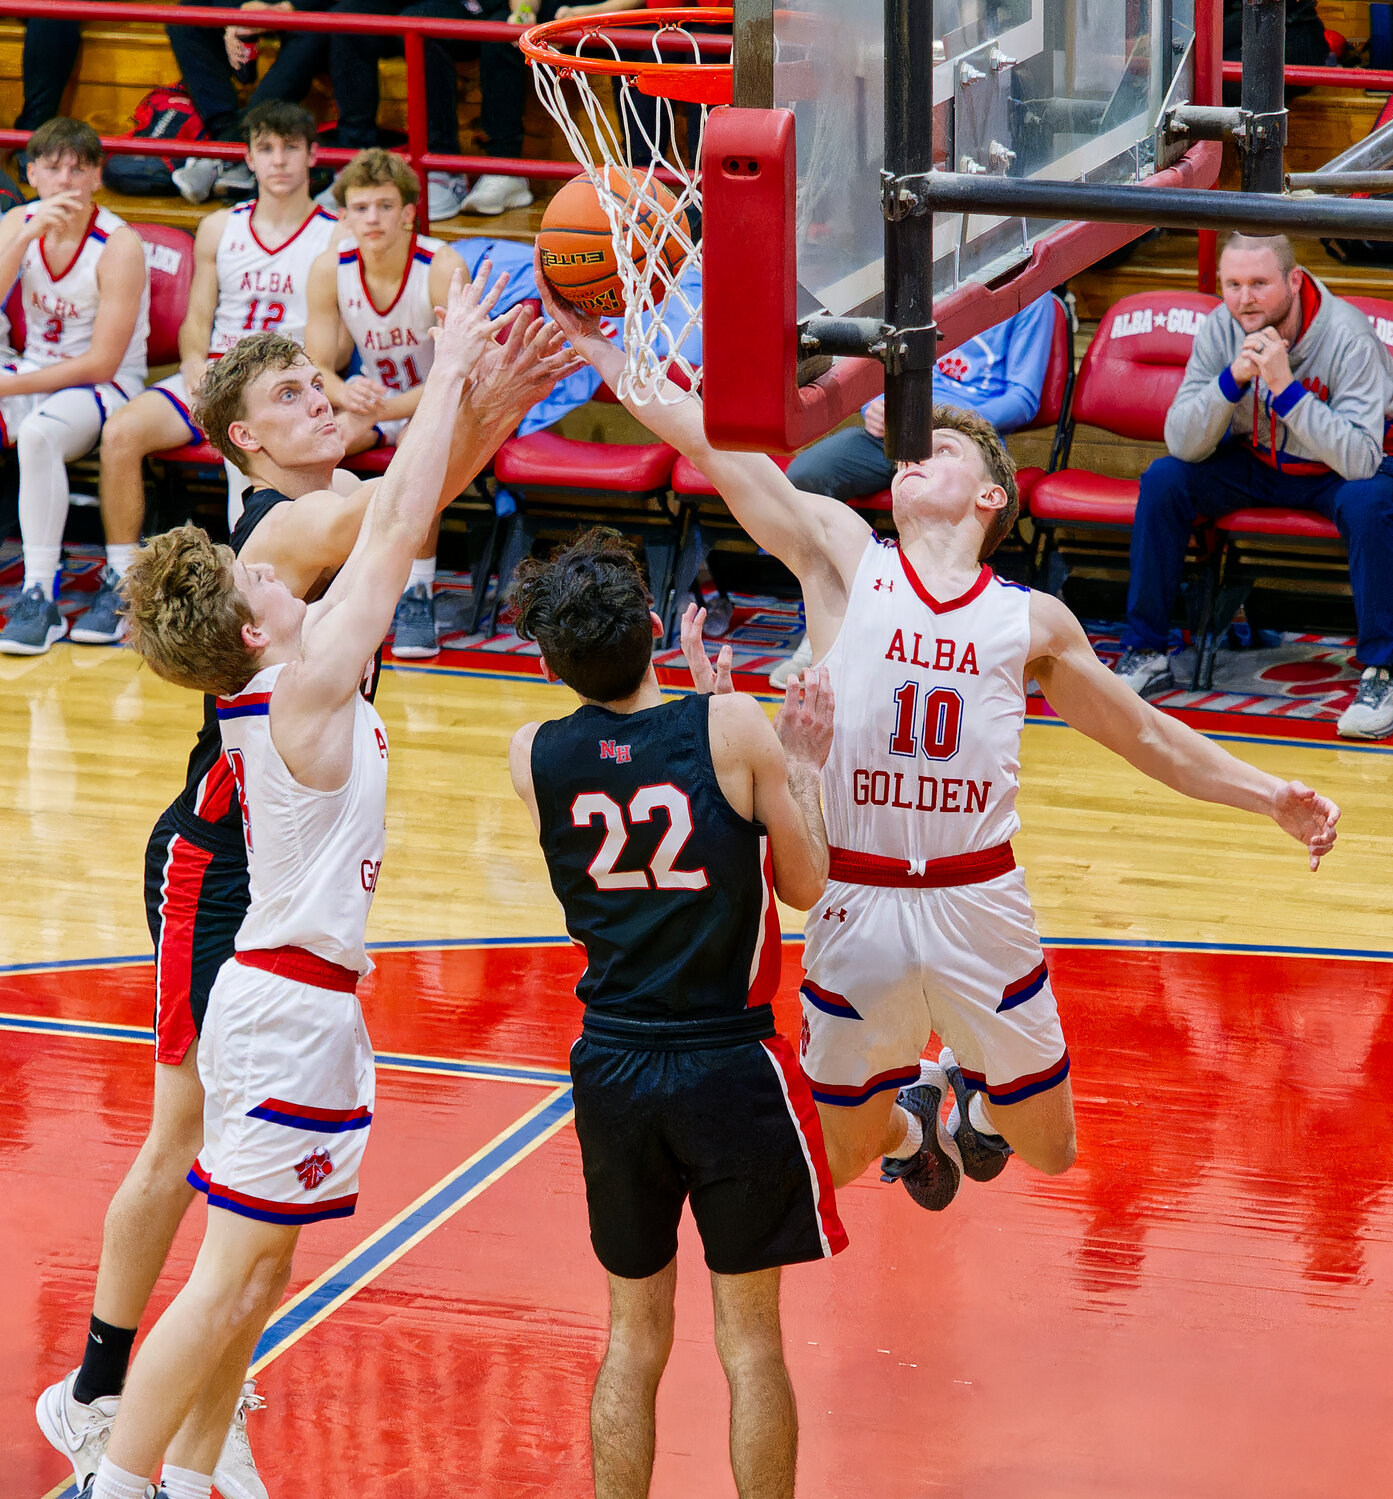 Cameron Lennon and Gaven Parker fight for the rebound against North Hopkins.